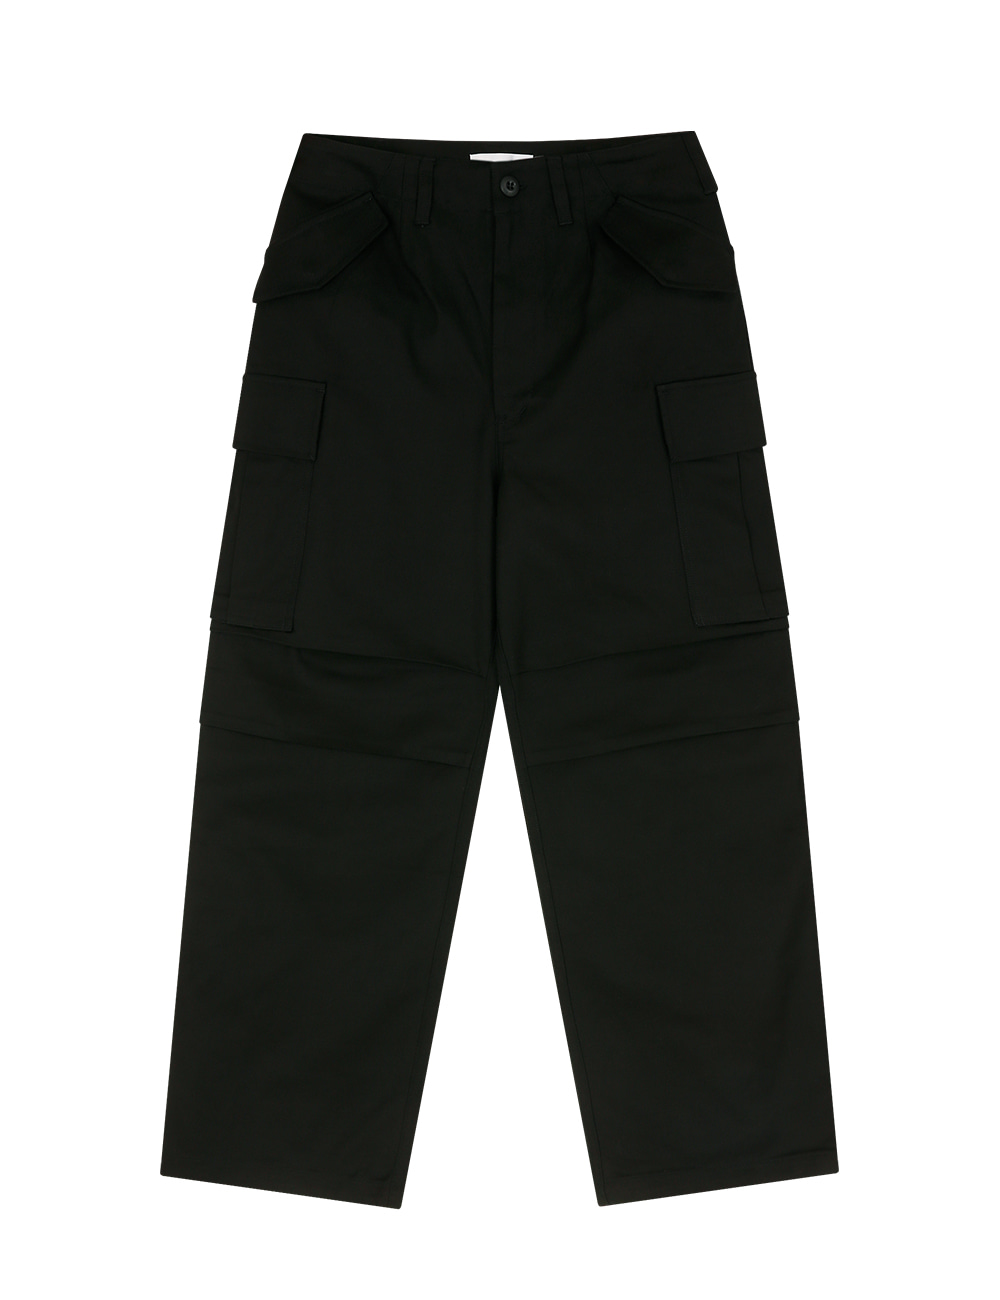 M65 FRENCH WORKER SERGE CARGO PANTS (BLACK)